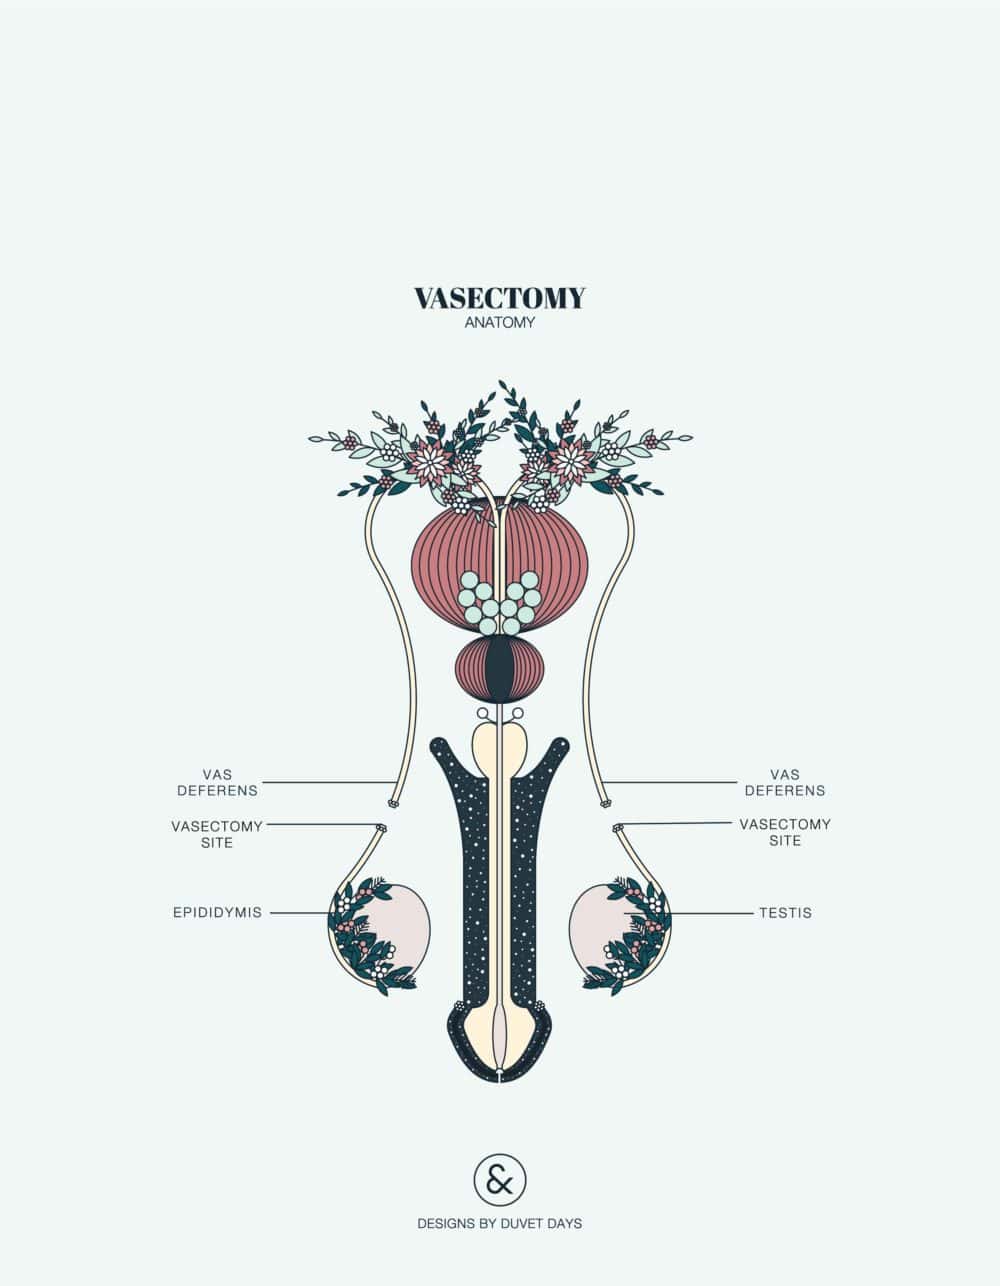 Designs By Duvet Days_Anatomy Illustrations_8.5x11_Vasectomy Anatomy_Preview